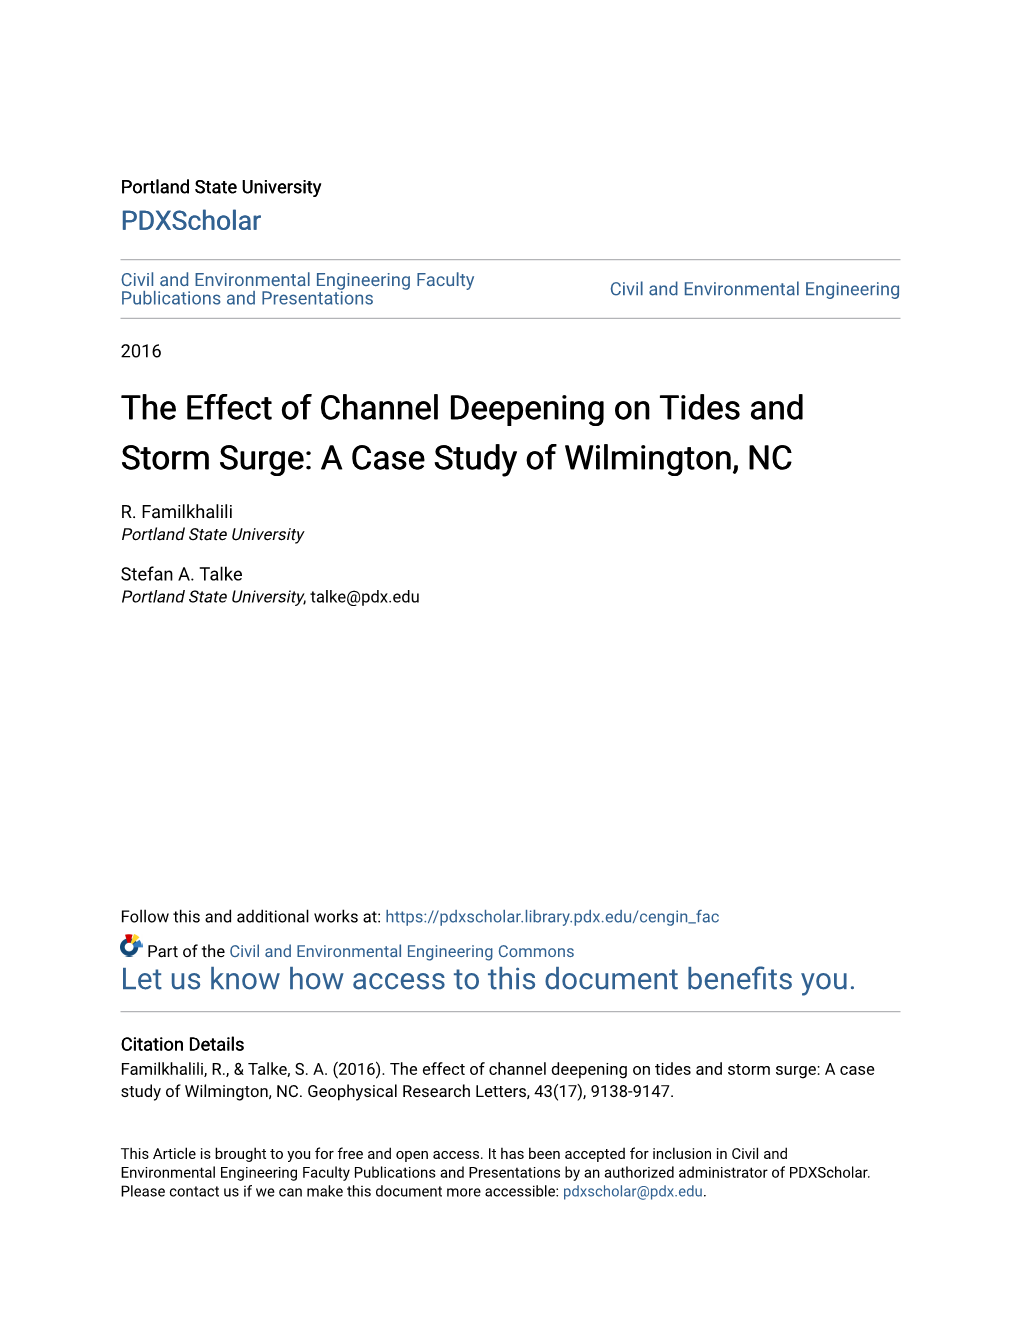 The Effect of Channel Deepening on Tides and Storm Surge: a Case Study of Wilmington, NC